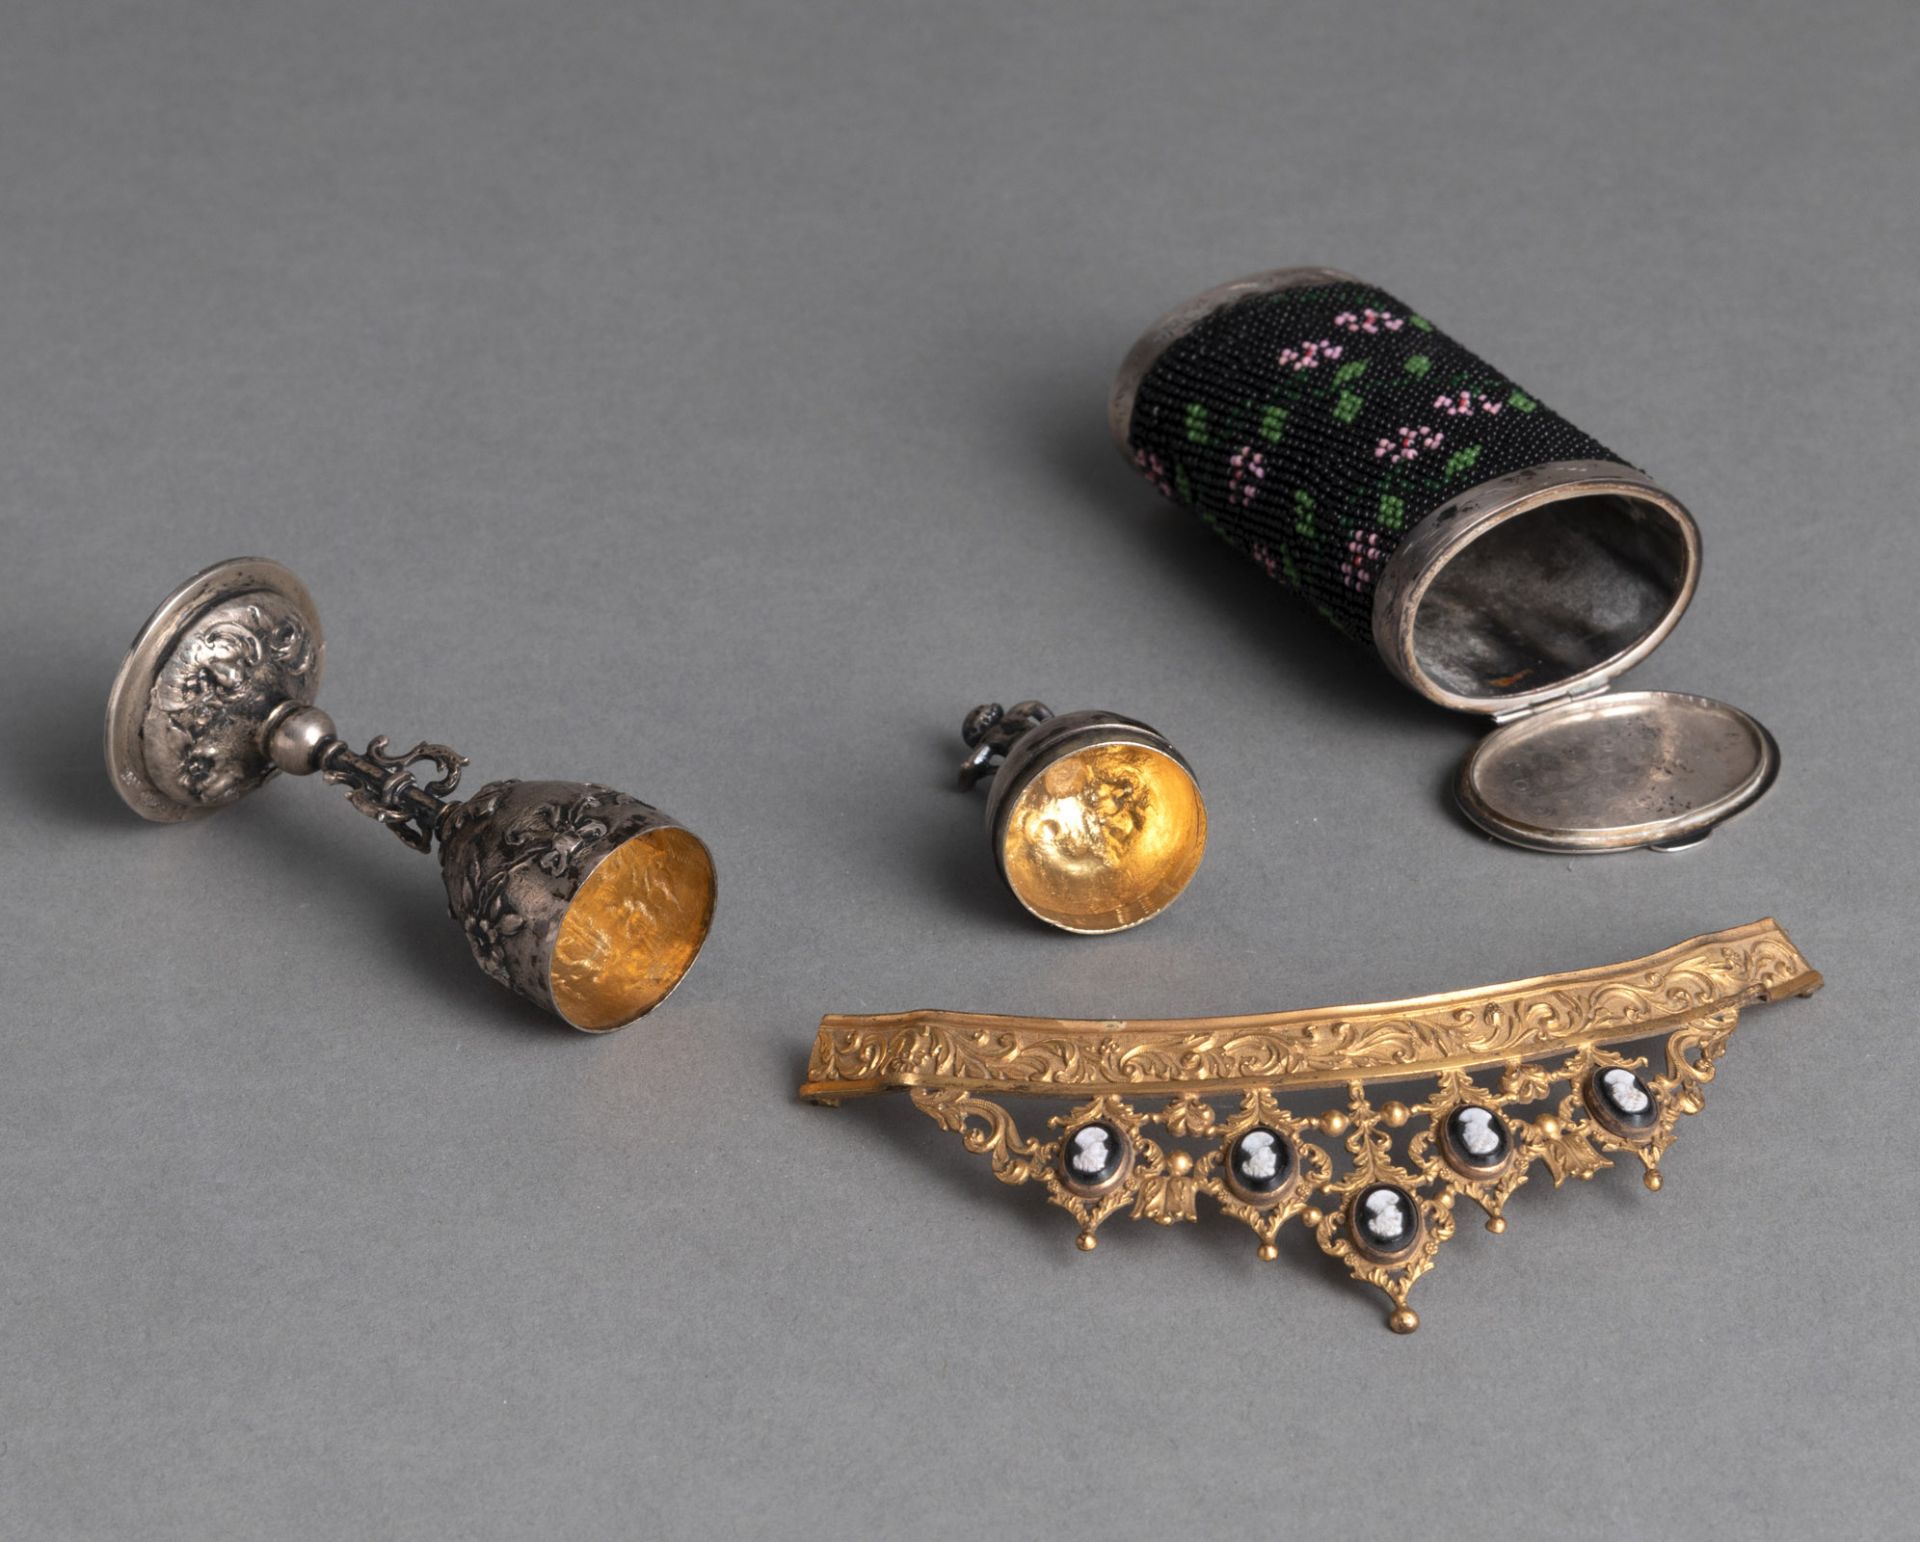 A TIARA, A MINIATURE CUP AND A SMALL CASE - Image 4 of 5